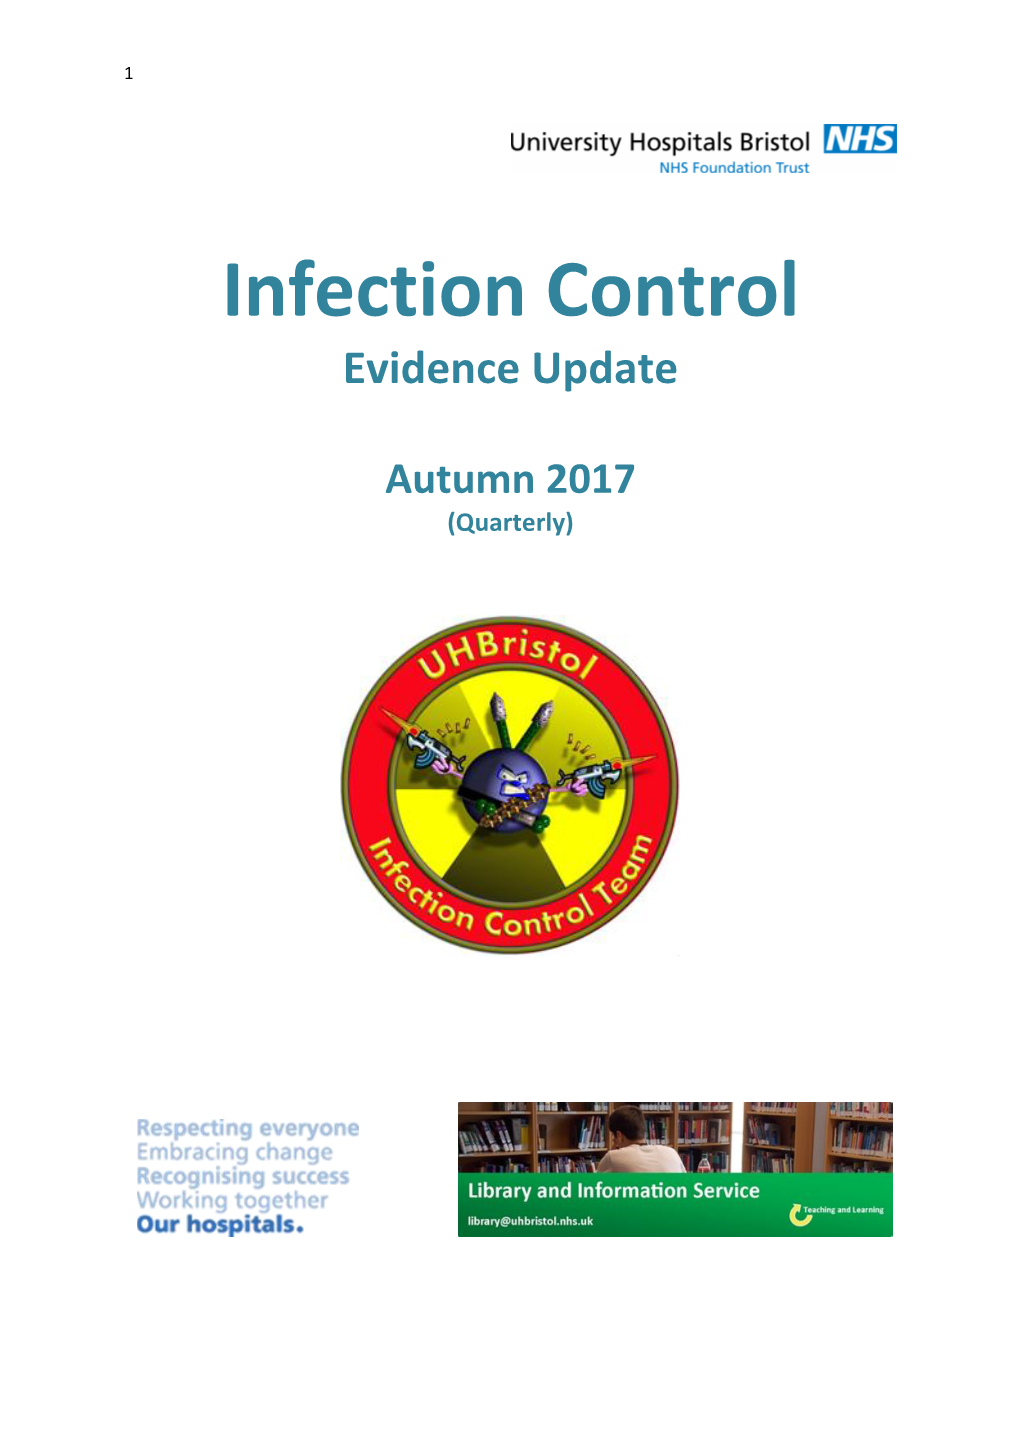 Infection Control Evidence Update